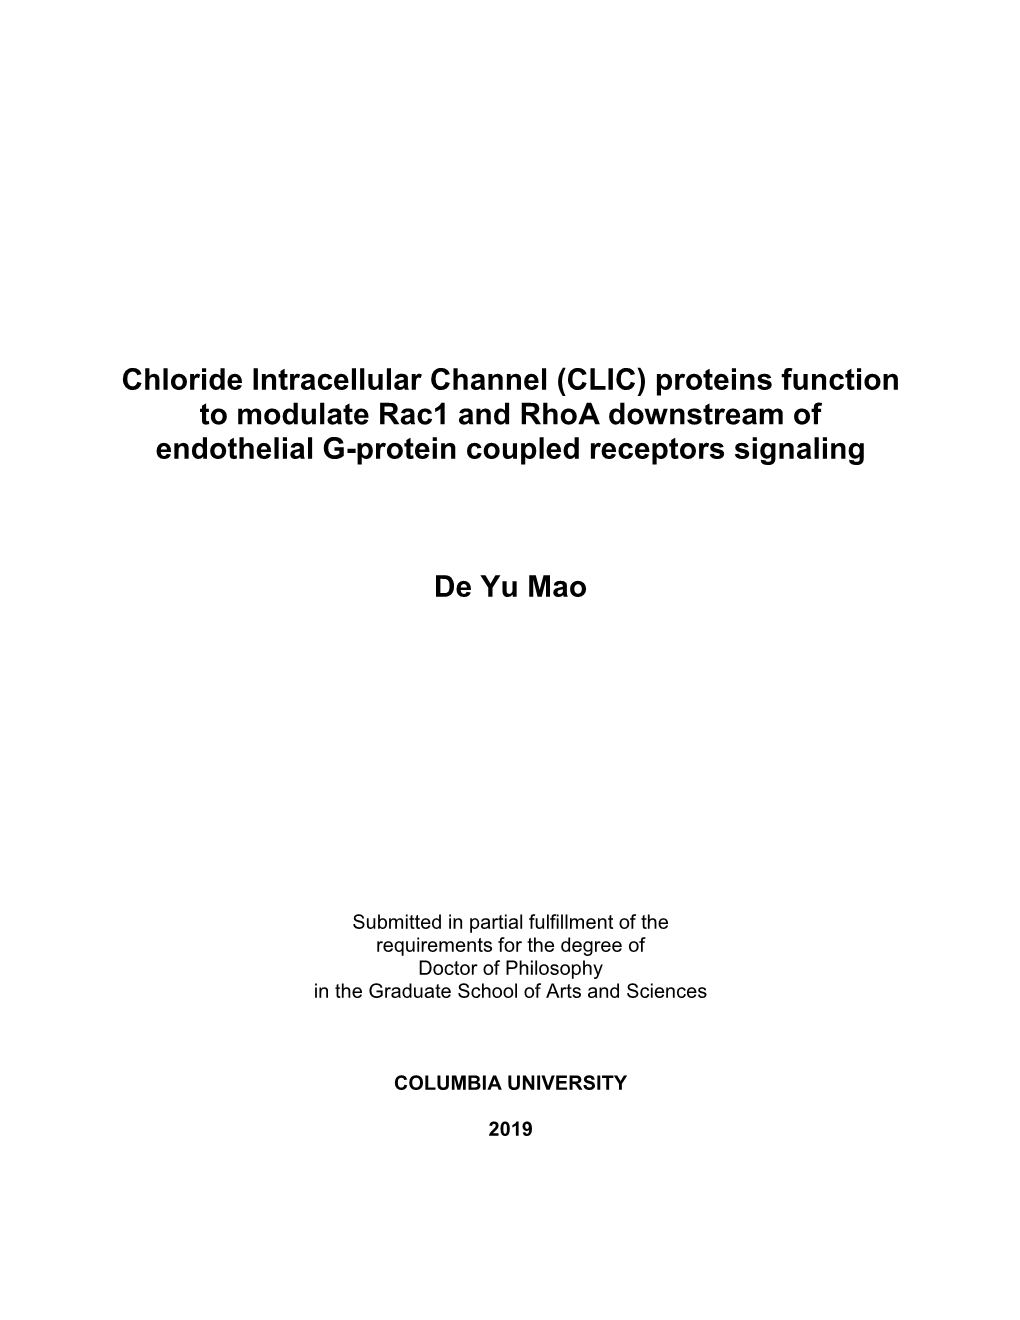 Chloride Intracellular Channel (CLIC) Proteins Function to Modulate Rac1 and Rhoa Downstream of Endothelial G-Protein Coupled Receptors Signaling